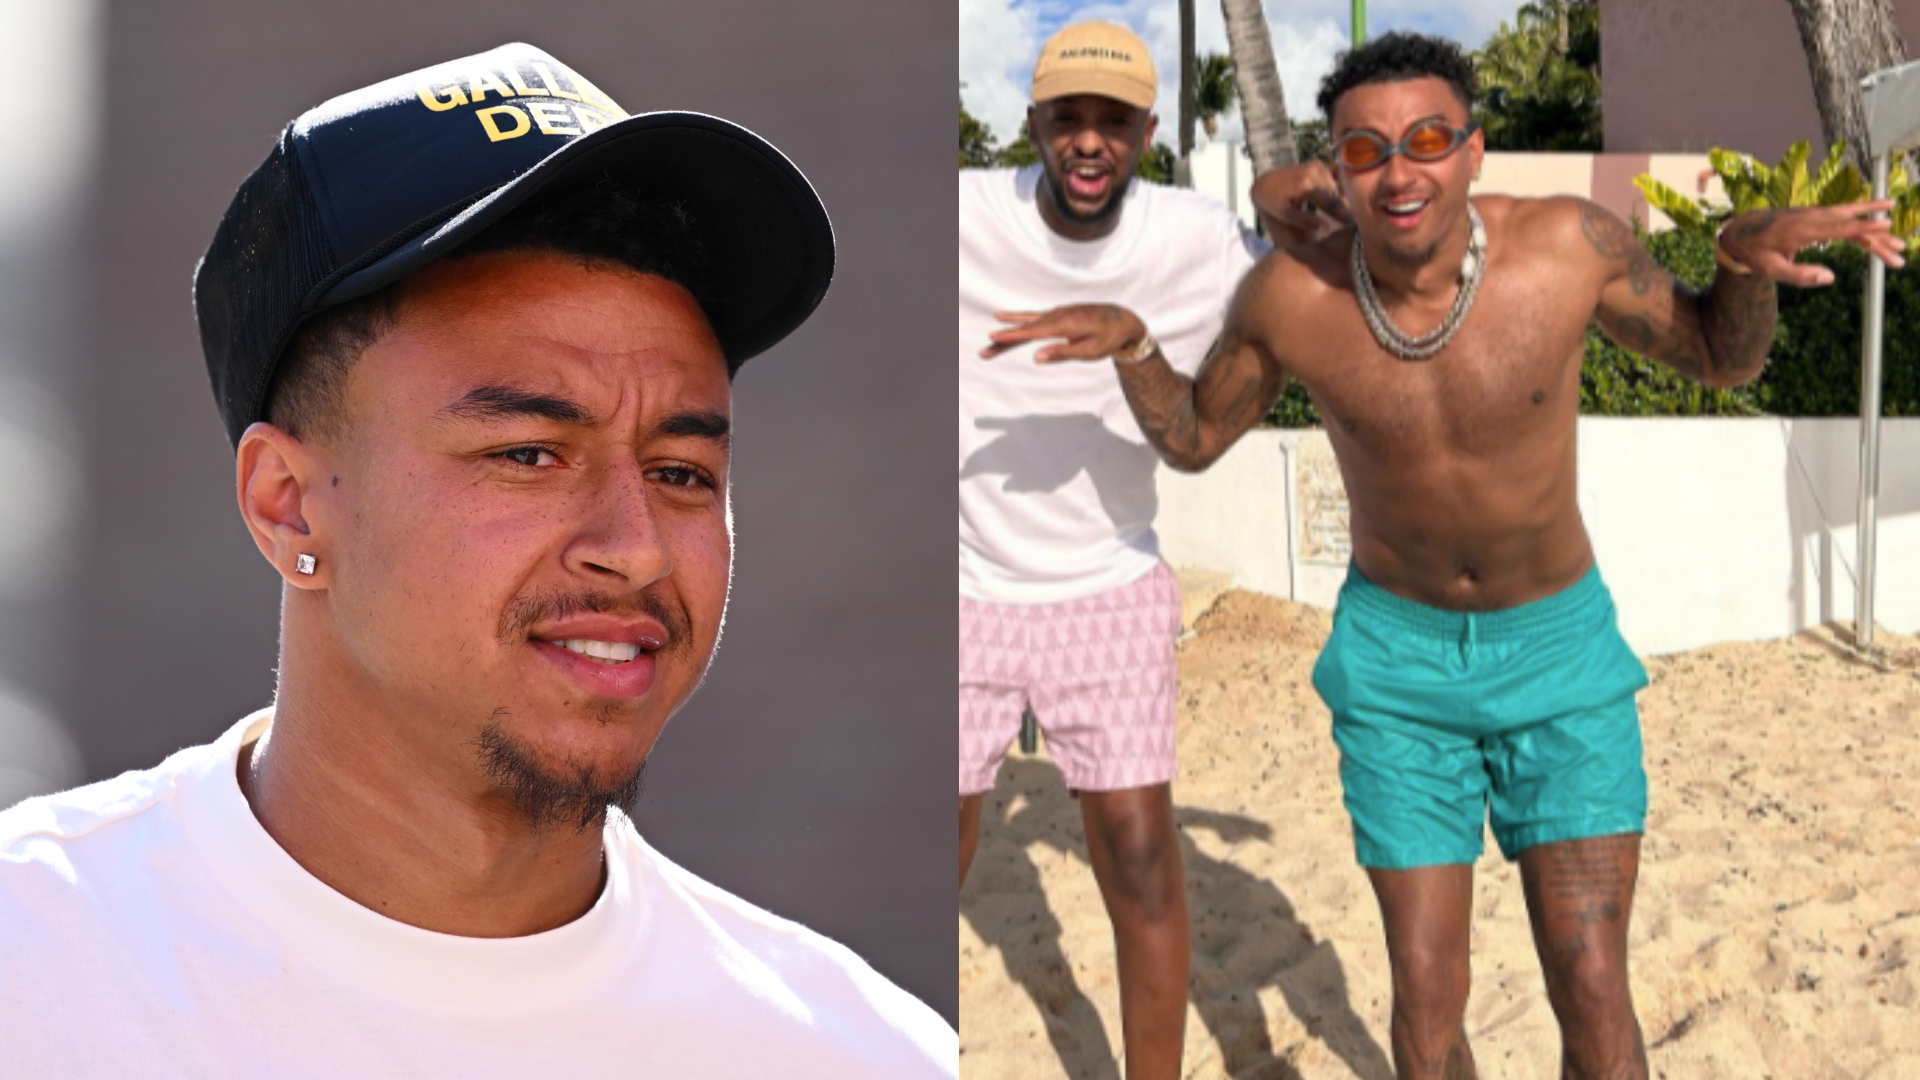 Jesse Lingard takes mind off Nottingham Forest release by jetting off for sun-soaked holiday in Barbados